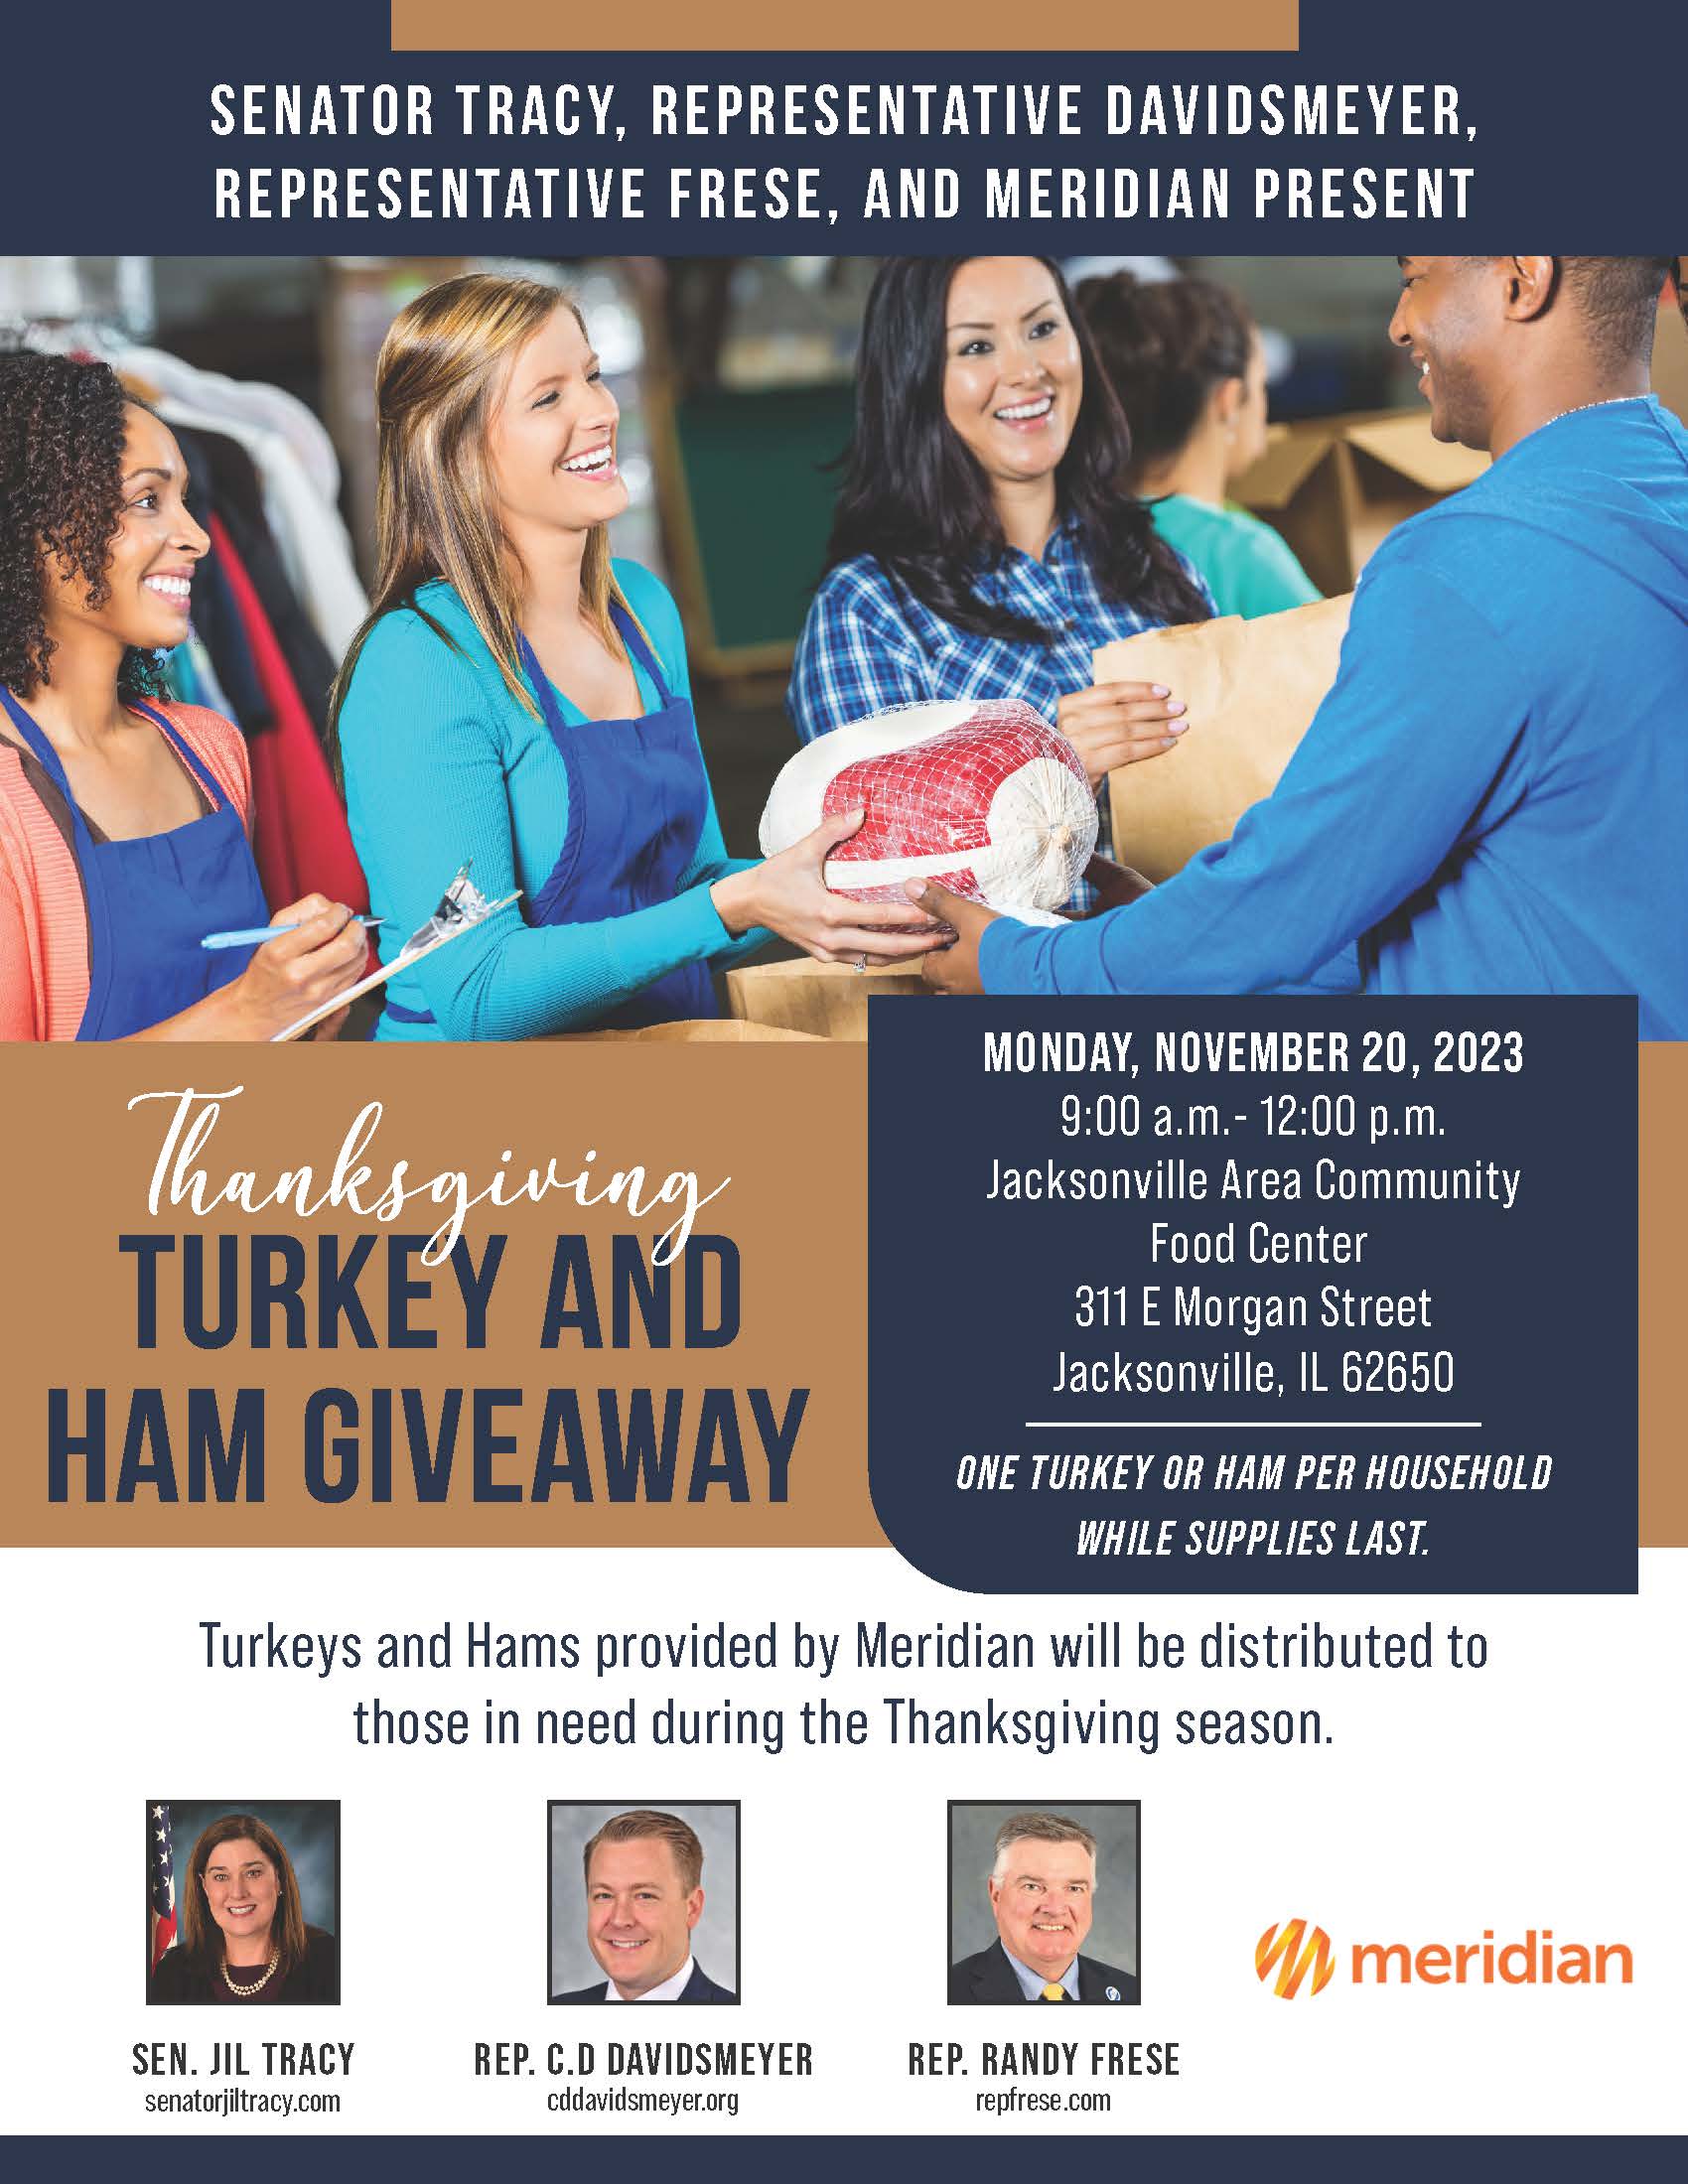 Thanksgiving Turkey and Ham Giveaway set for November 20